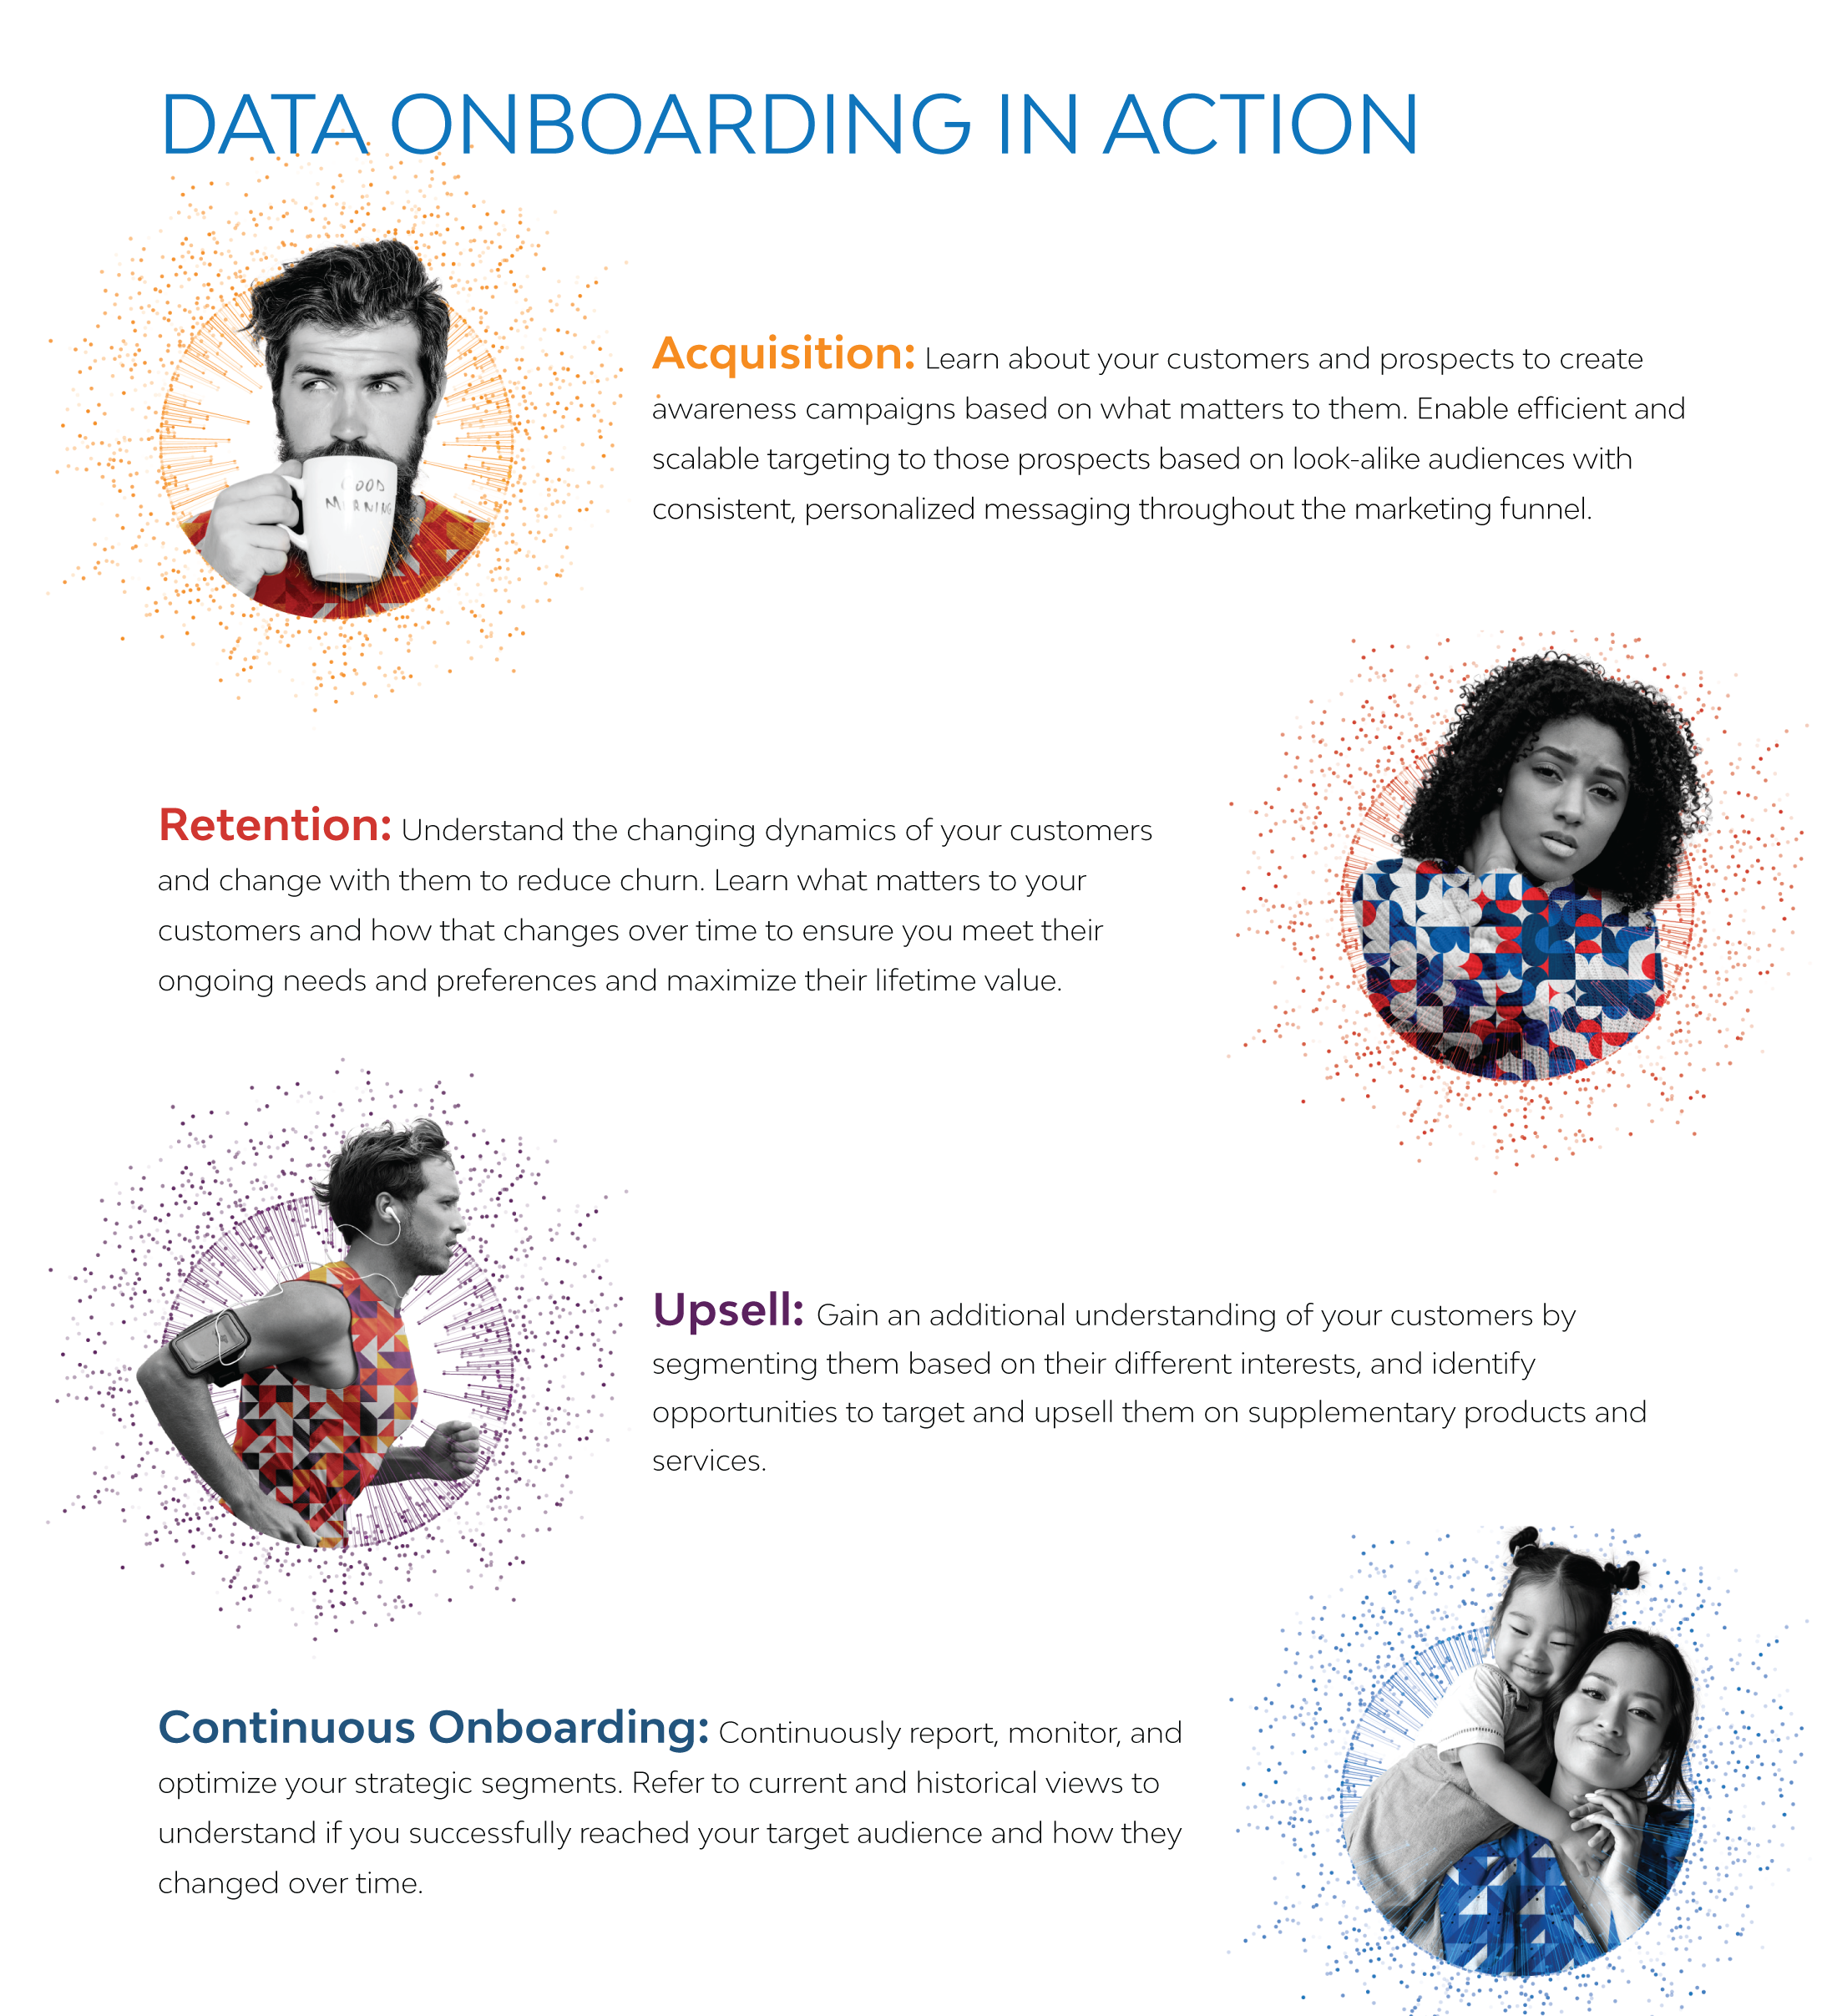 Data onboarding acquisition, retention, and upselling benefits